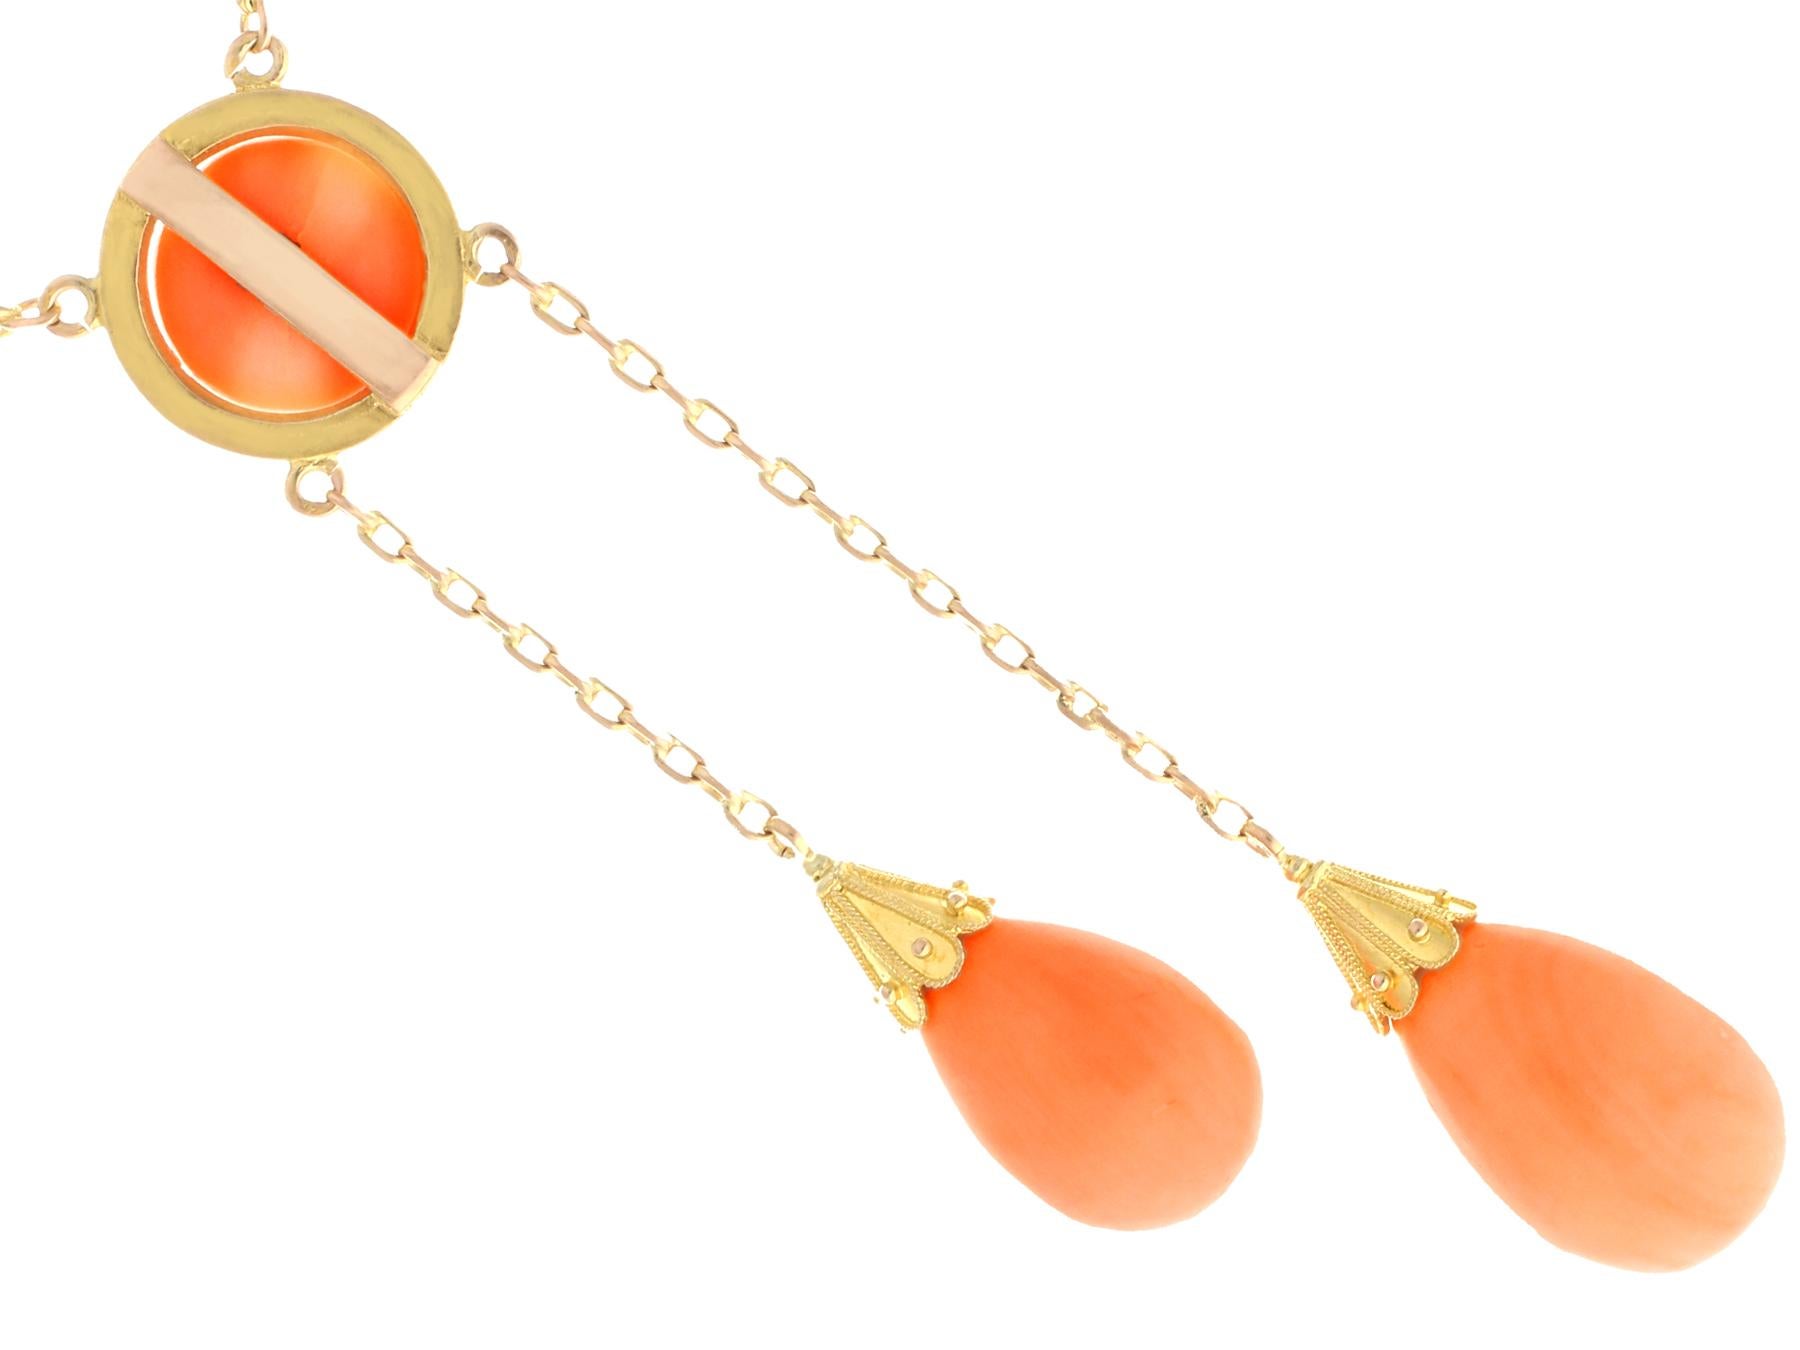 Women's Antique Victorian 35.22 Carat Cabochon Cut Coral and Yellow Gold Necklace For Sale